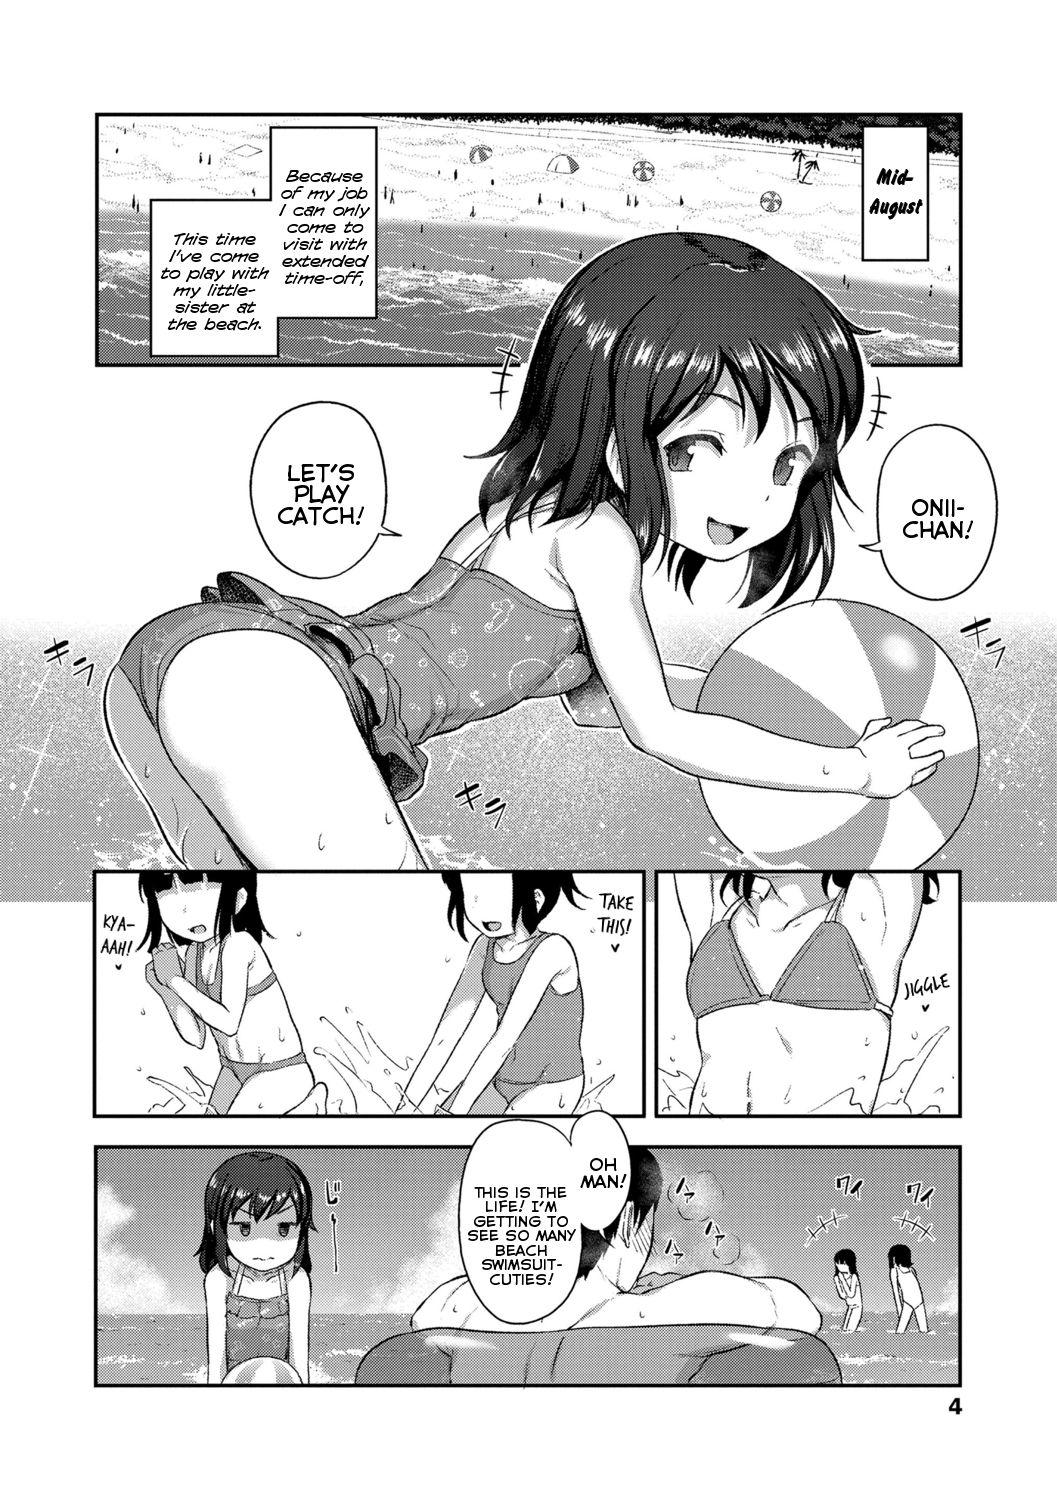 Oral Sex [Hayake] Imouto no Hadaka o Mite Koufun Suru nante Hen na Onii-chan | What Kind of Weirdo Onii-chan Gets Excited From Seeing His Little Sister Naked? [English] [Mistvern + Shippoyasha] [Digital] Mmf - Page 6